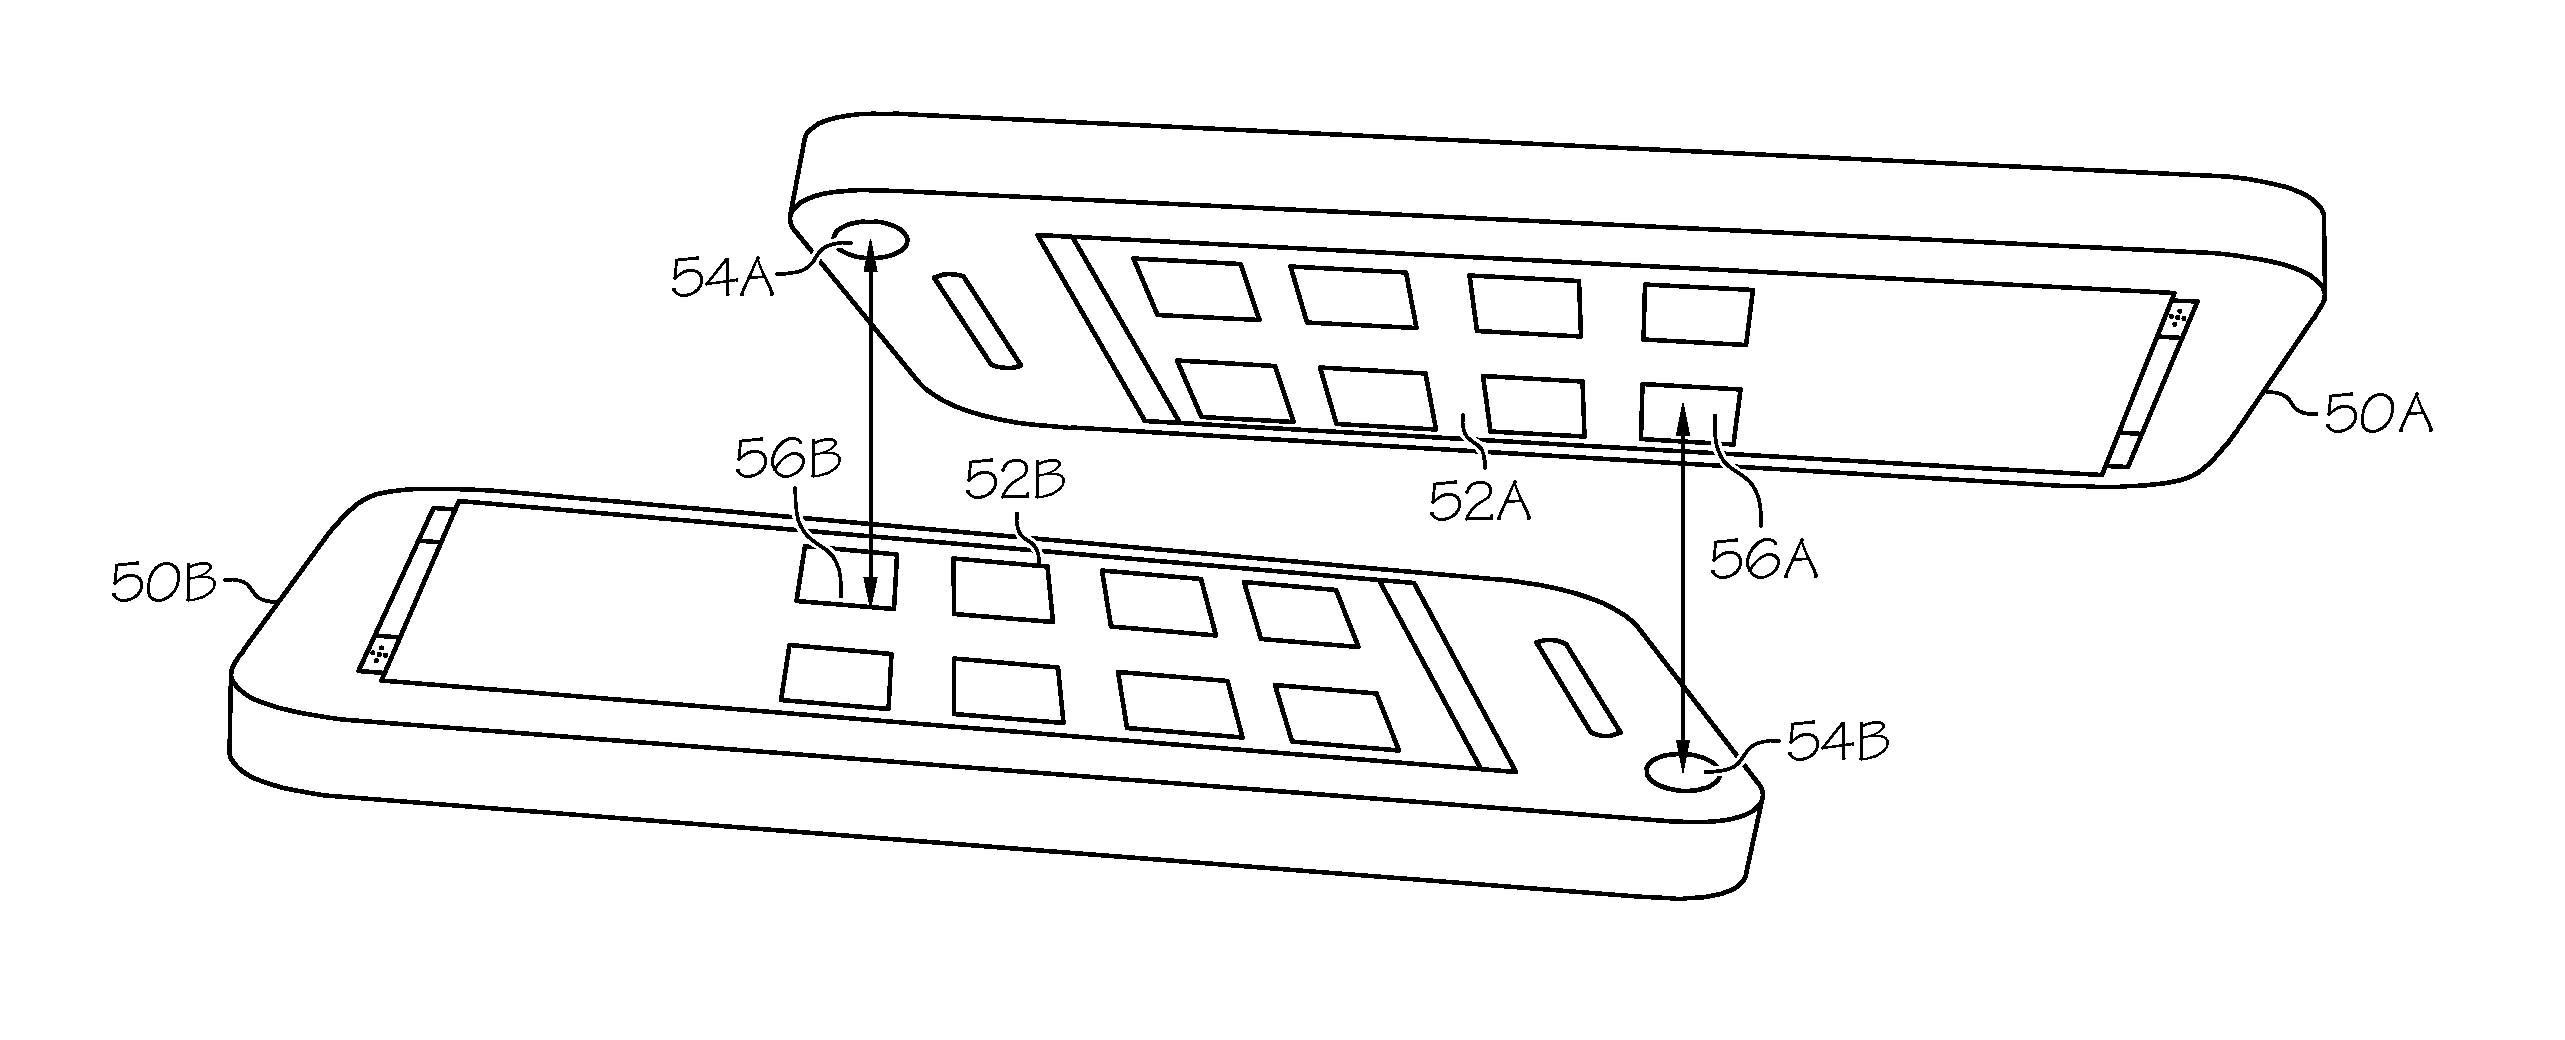 Mobile device digital communication and authentication methods